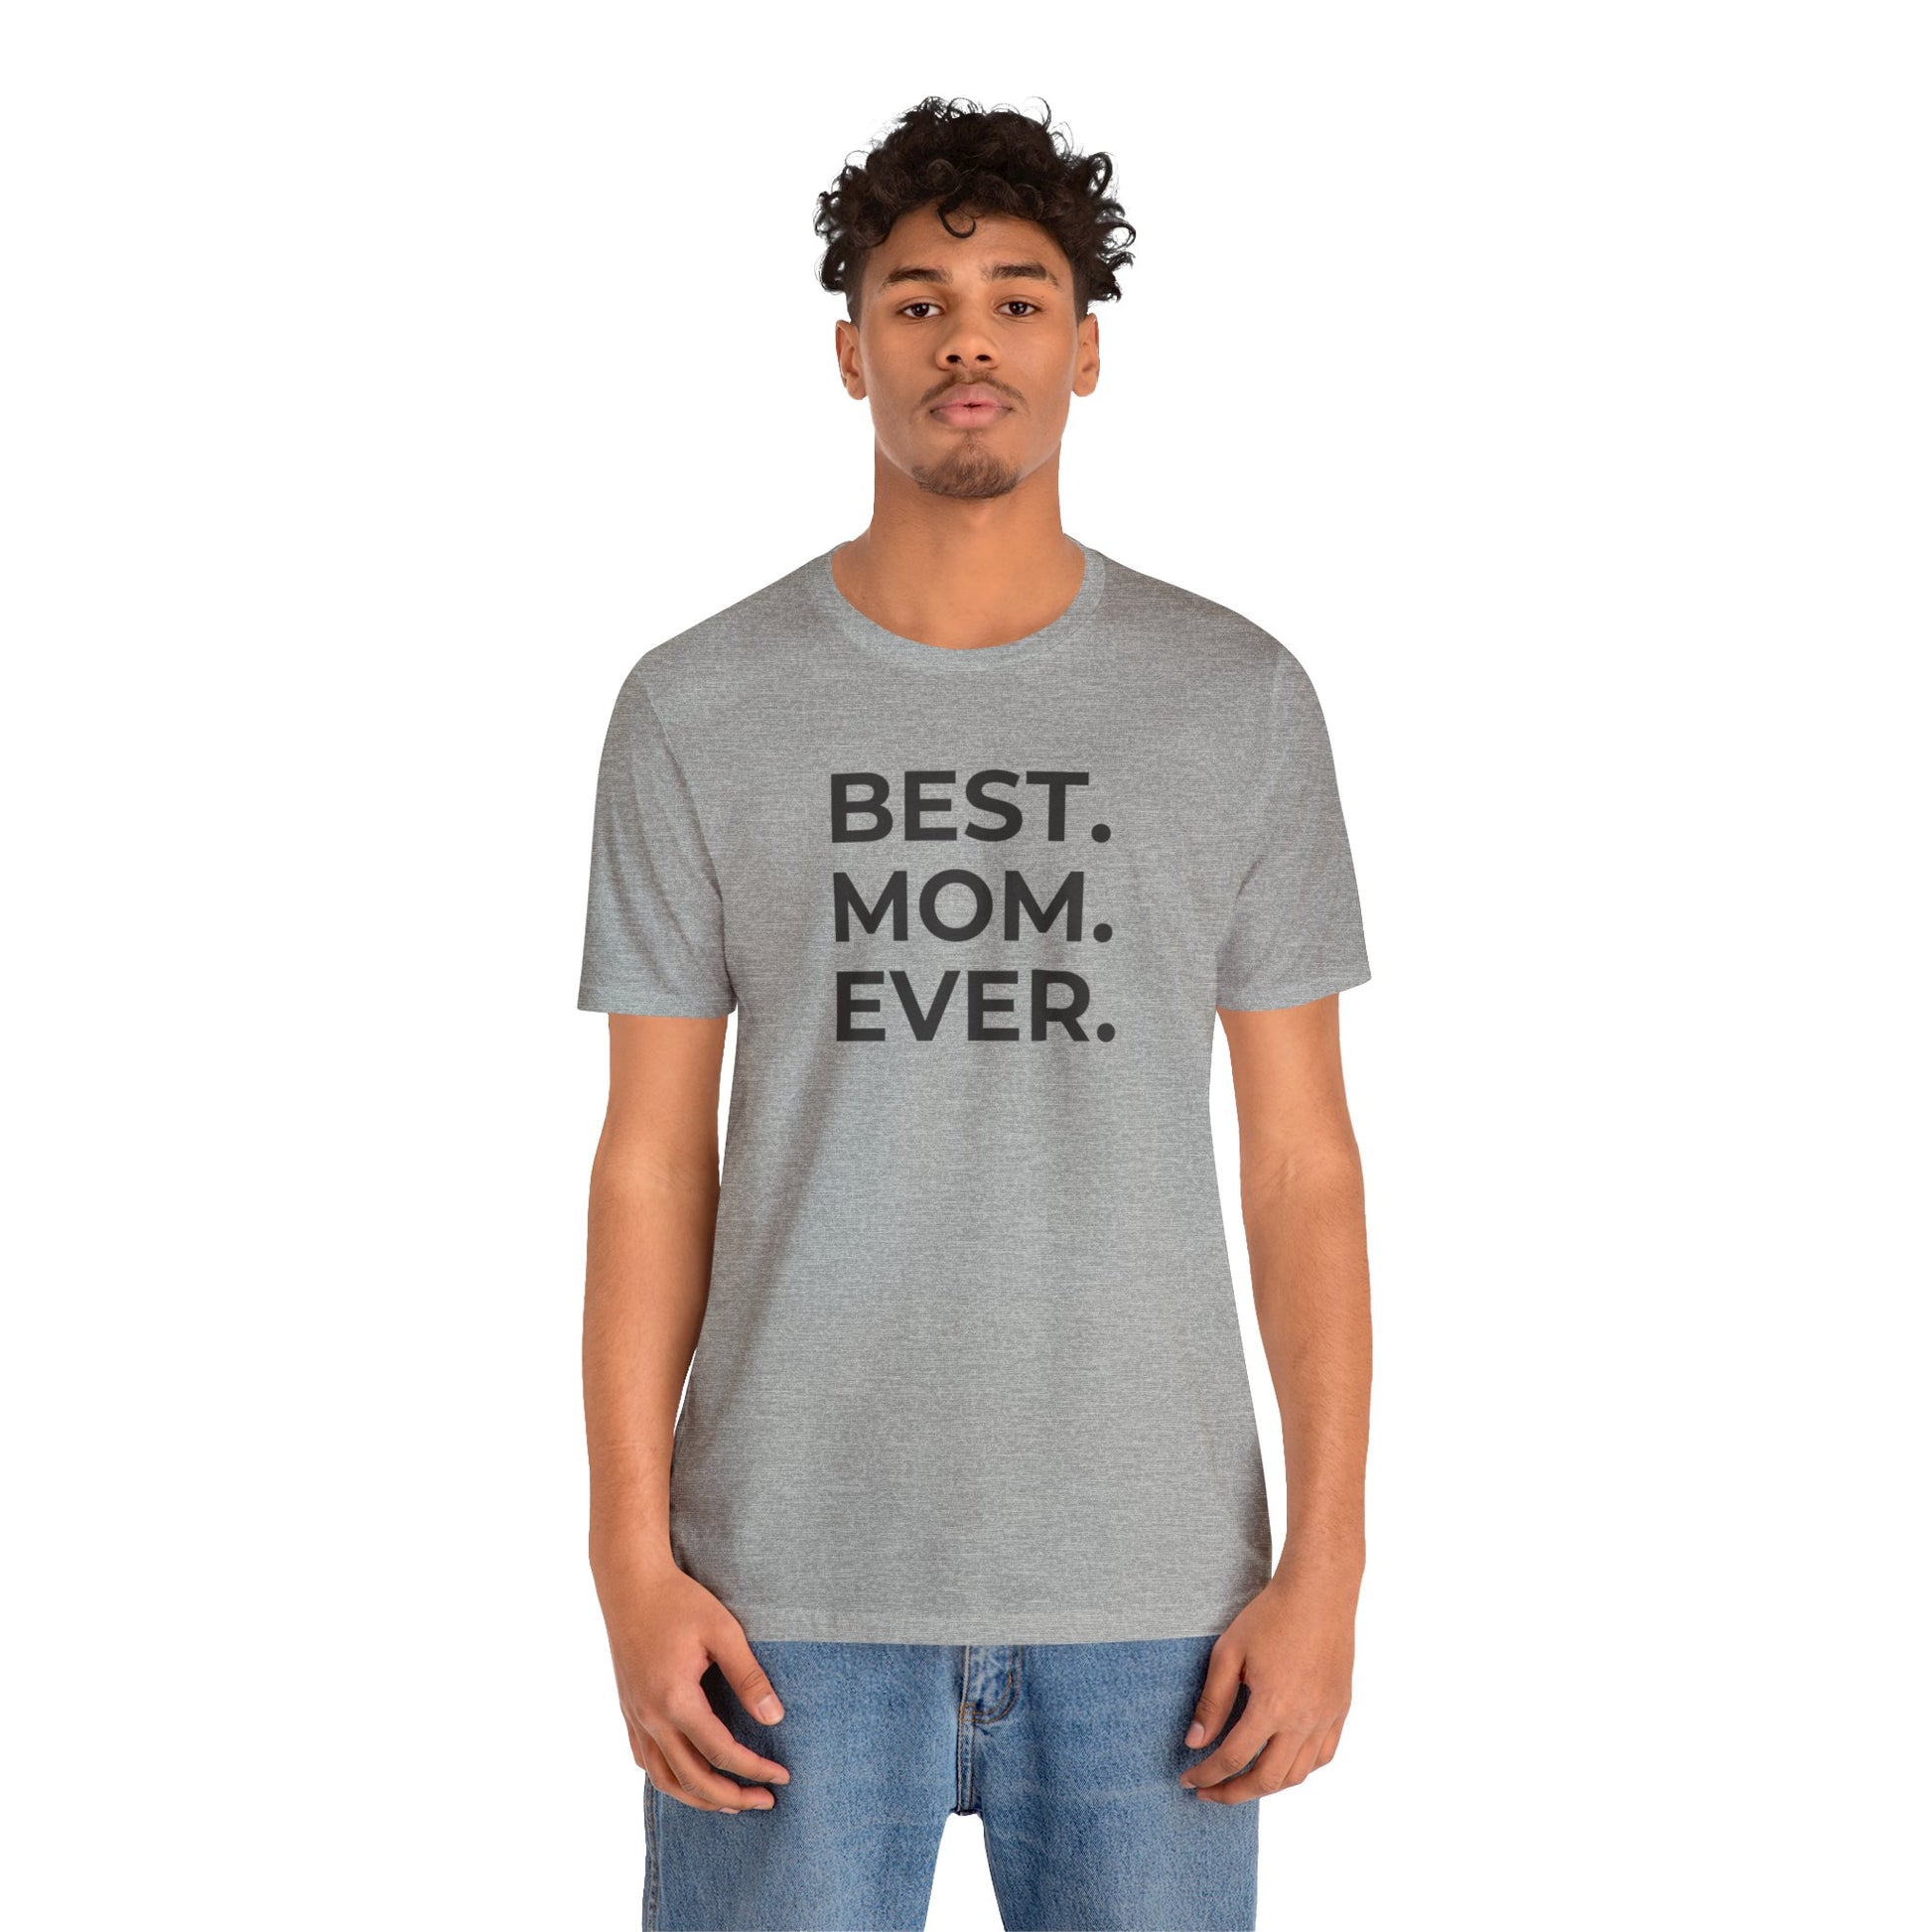 Best Mom Ever Women's Mother's Day T-Shirt